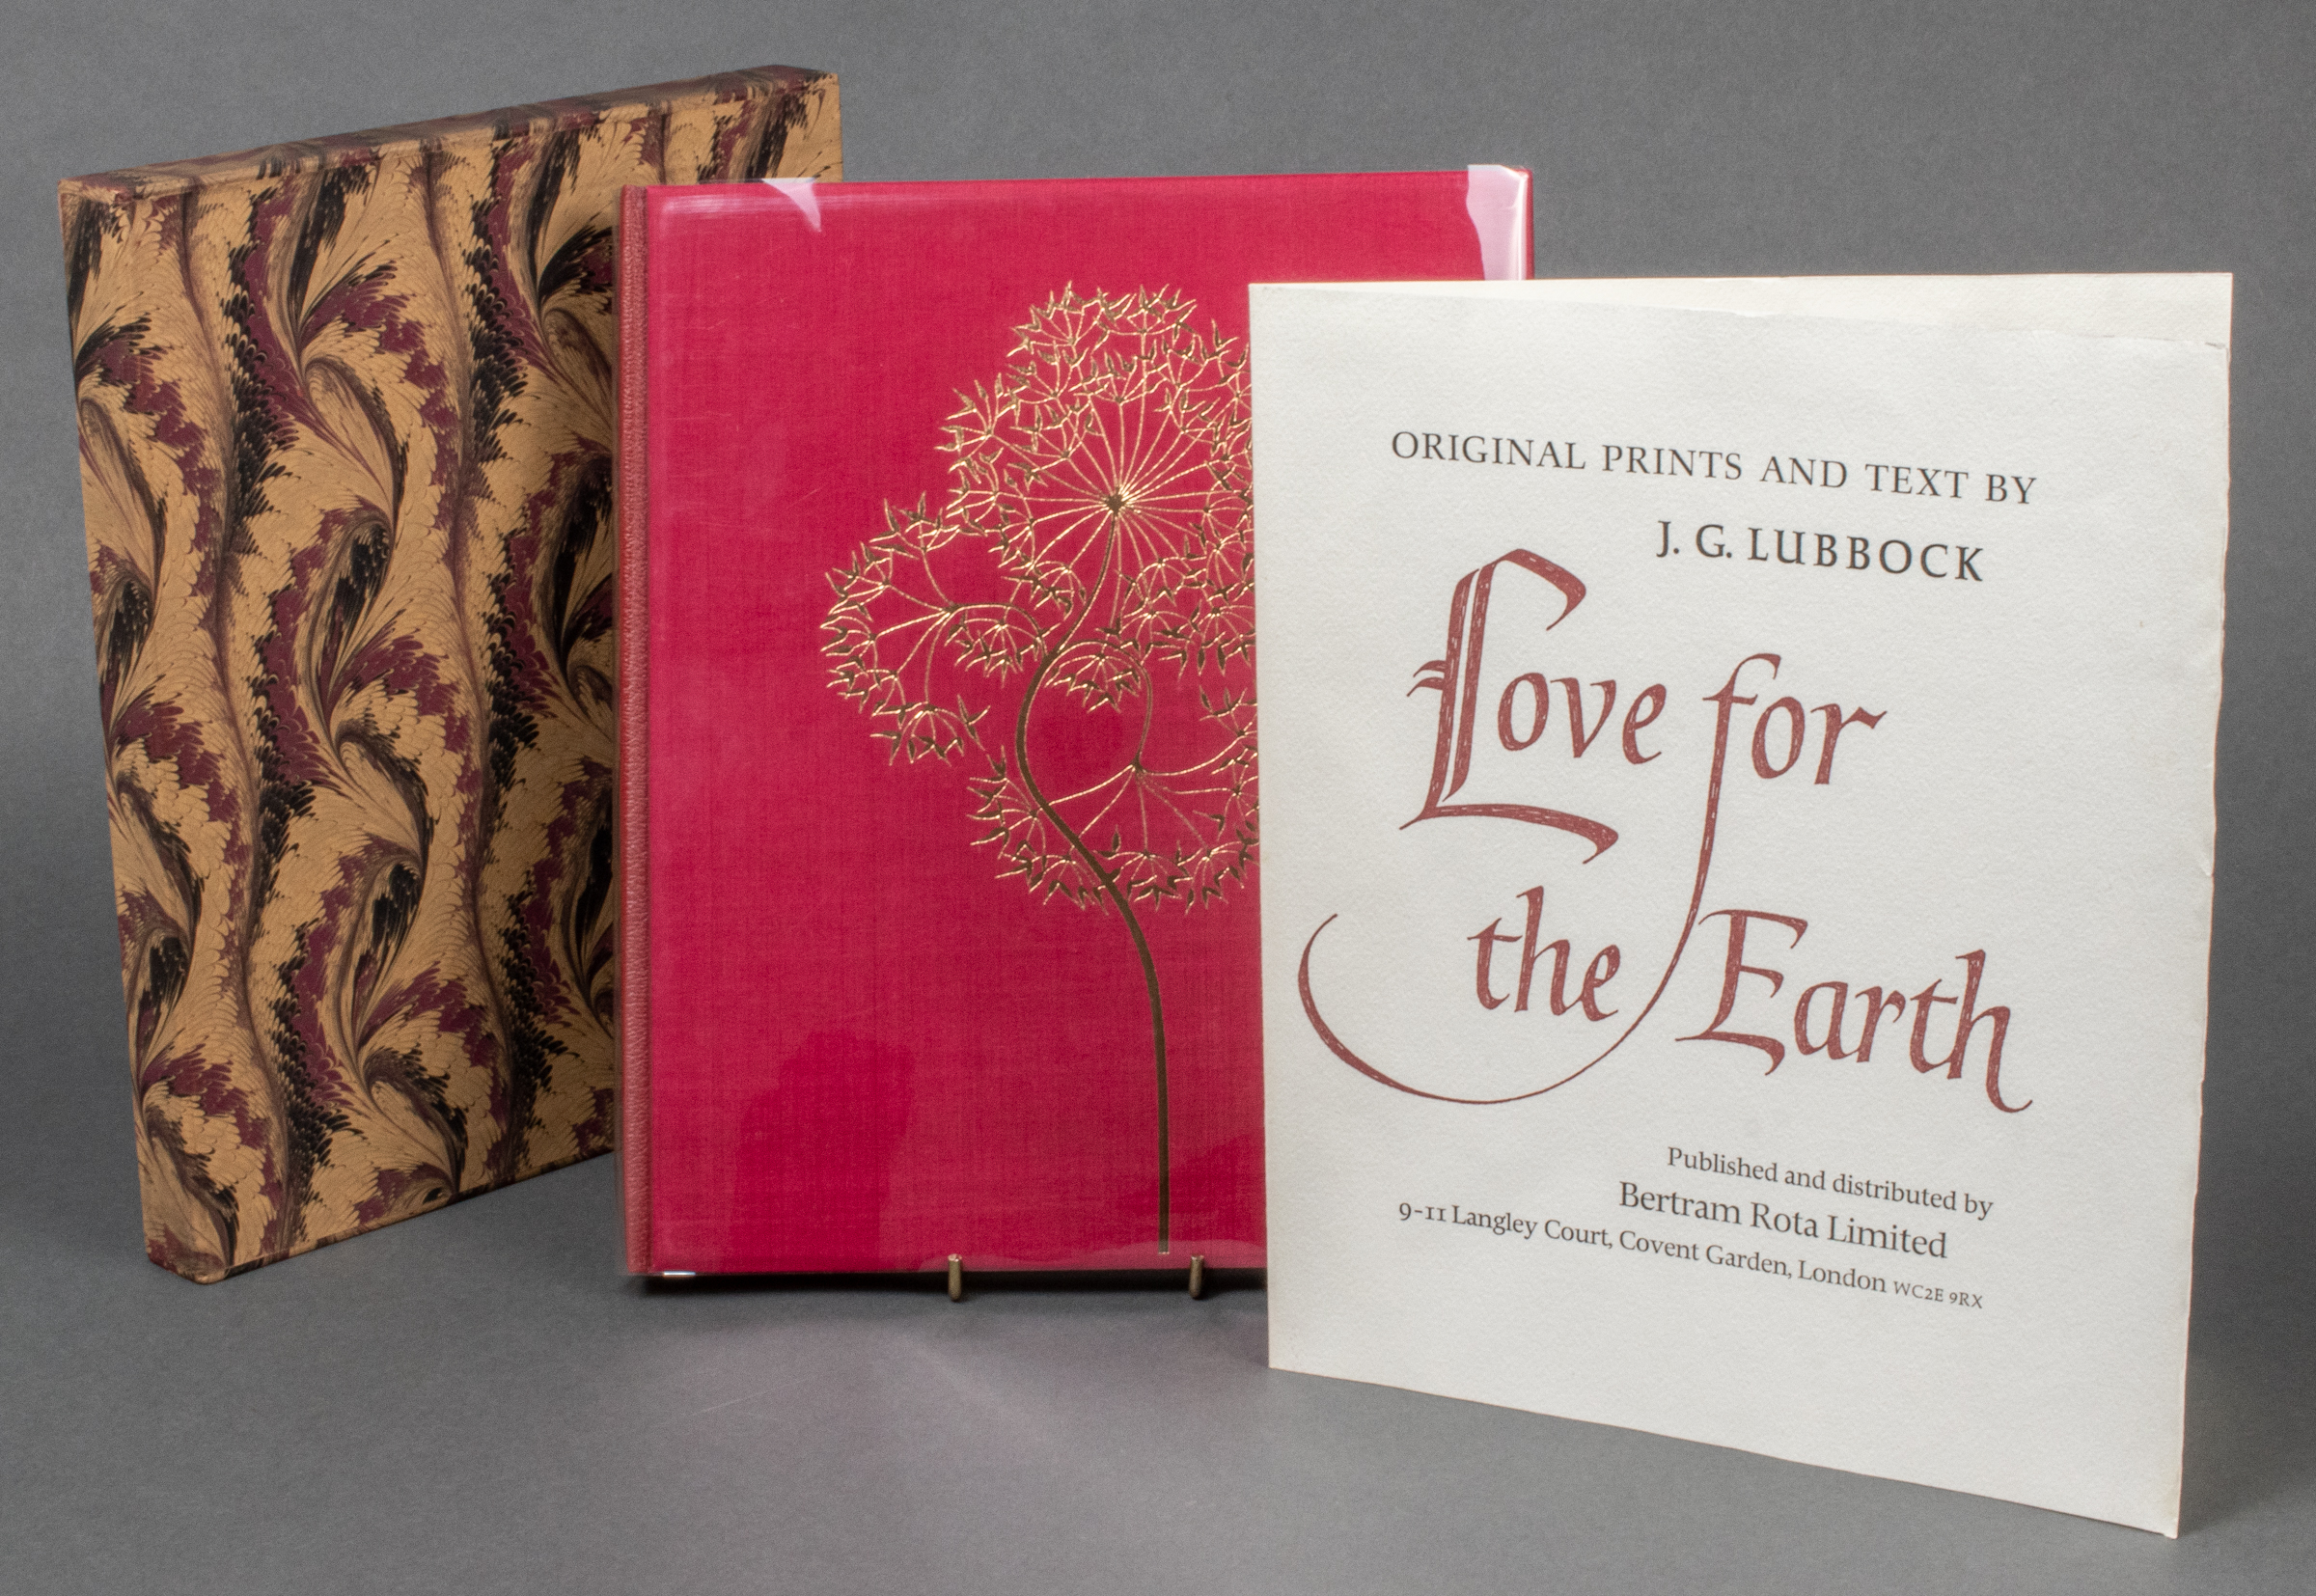 J.G. LUBBOCK "LOVE FOR THE EARTH"